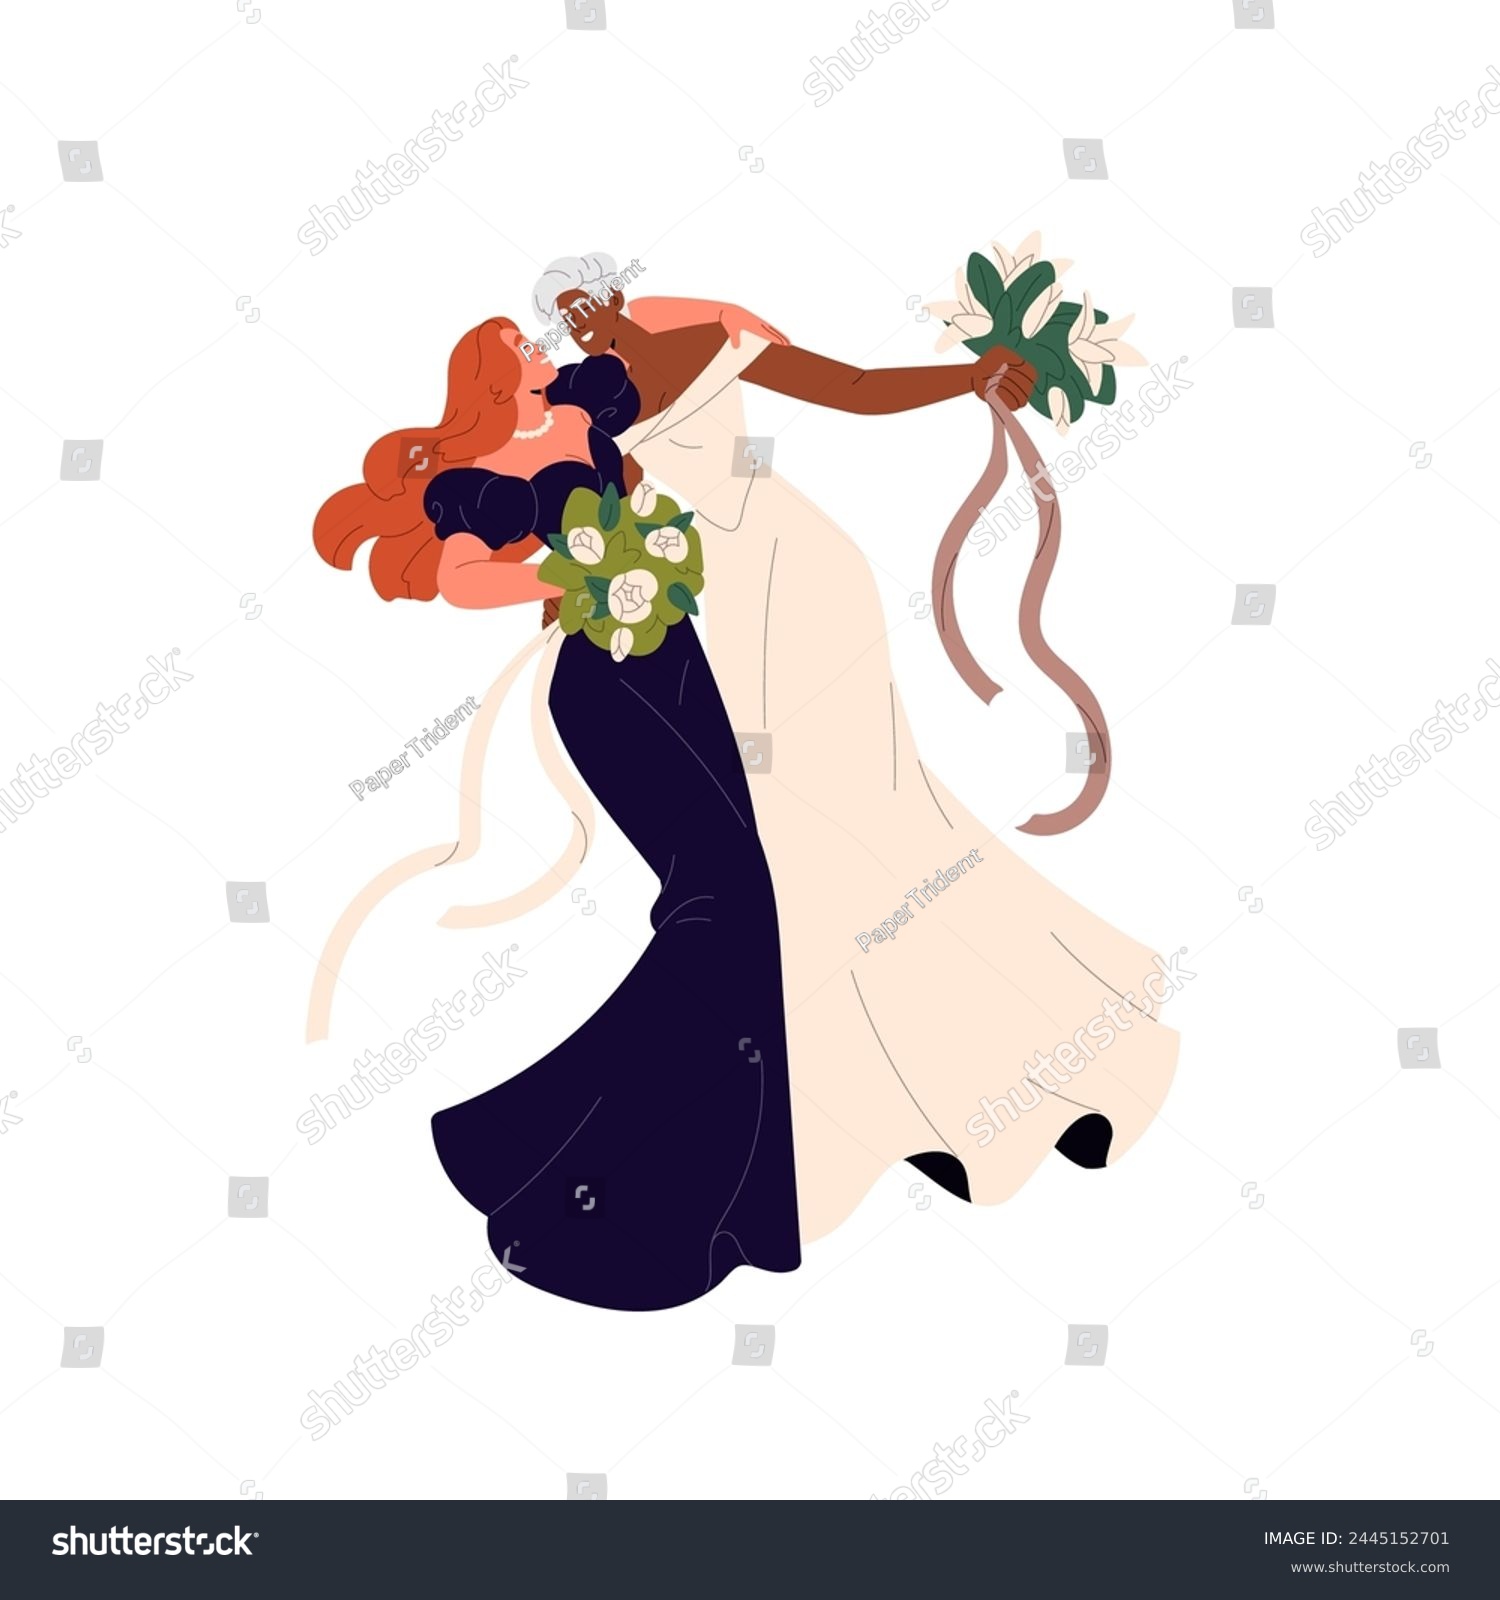 SVG of Lesbians in bridal dresses celebrate marriage. Interracial homosexual couple wedding. Newlywed women hug, hold flowers. LGBT family bonding. Flat isolated vector illustration on white background svg